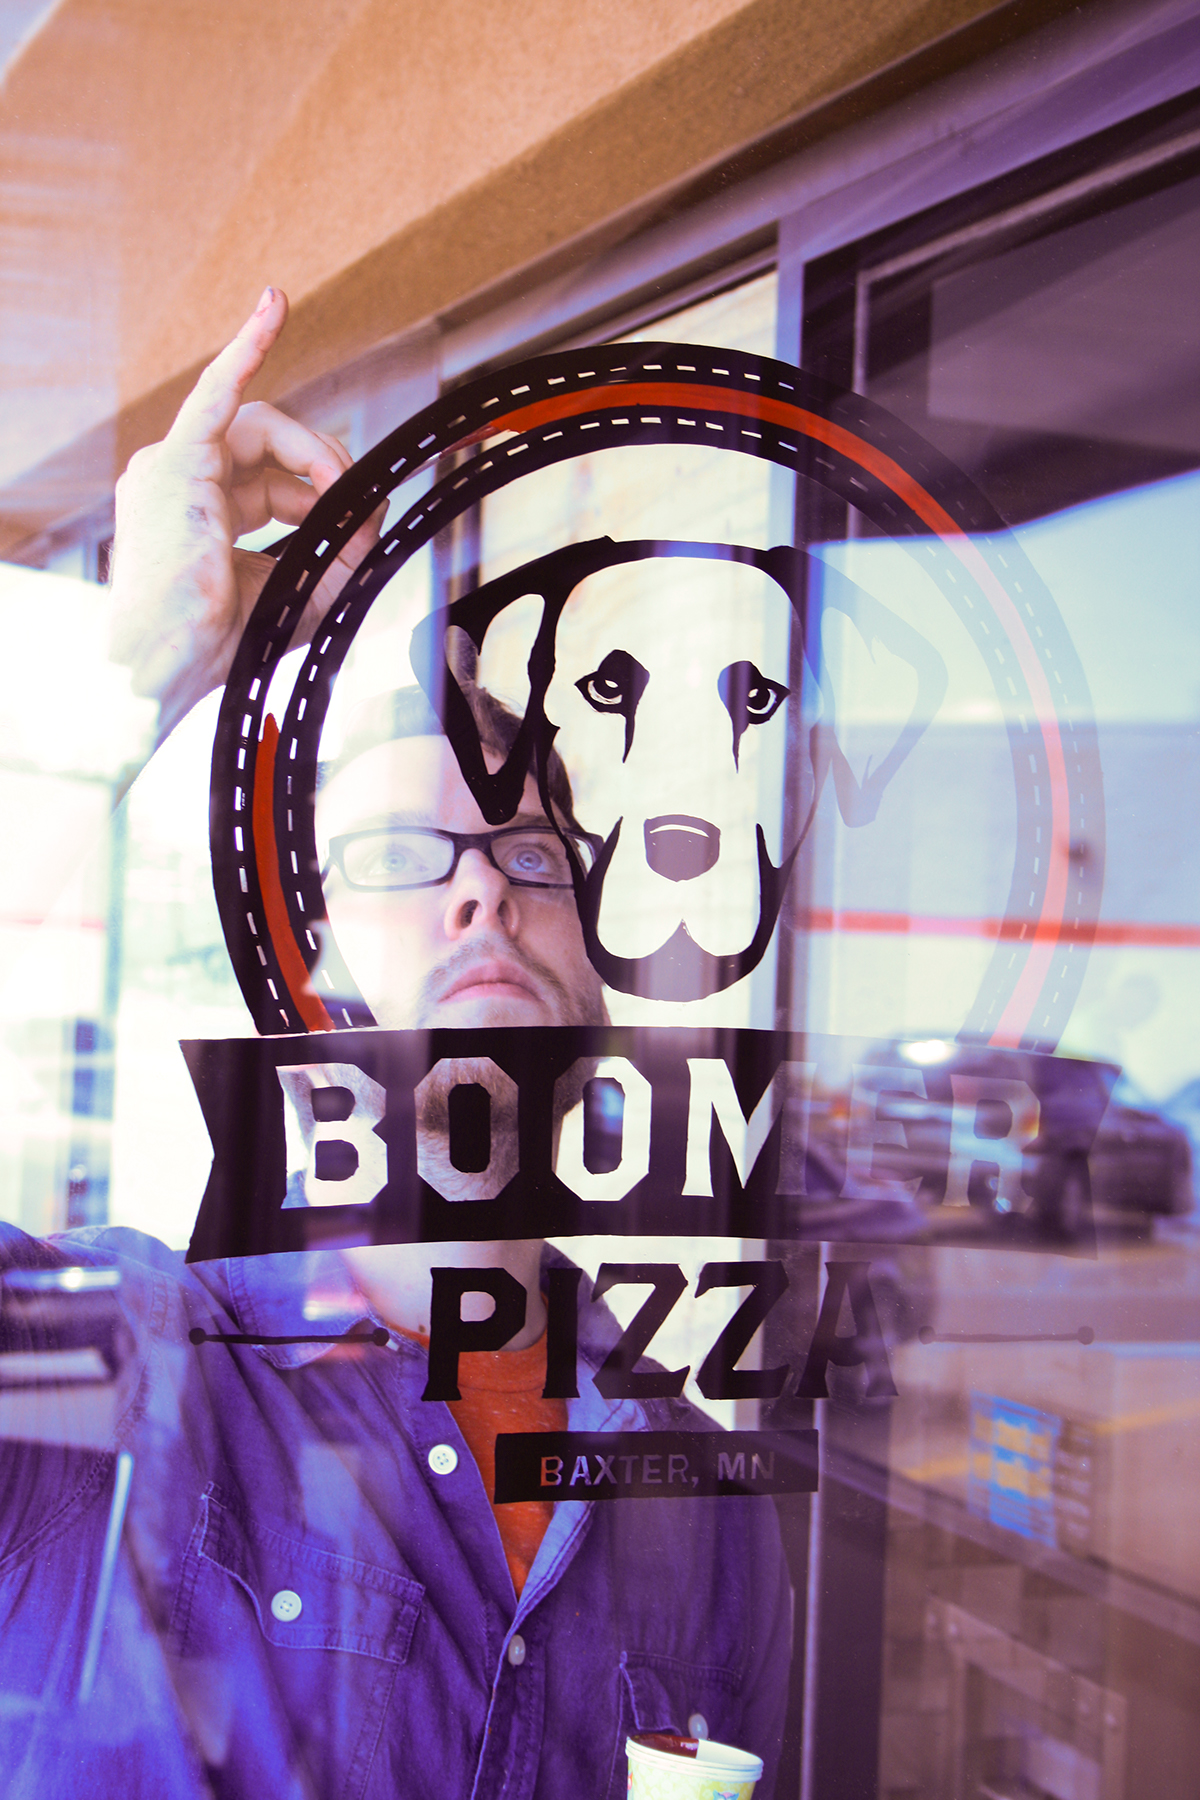 Pizza restaurant boomer sign painting signs lettering logo up north cabin dog hand letter hand paint craft